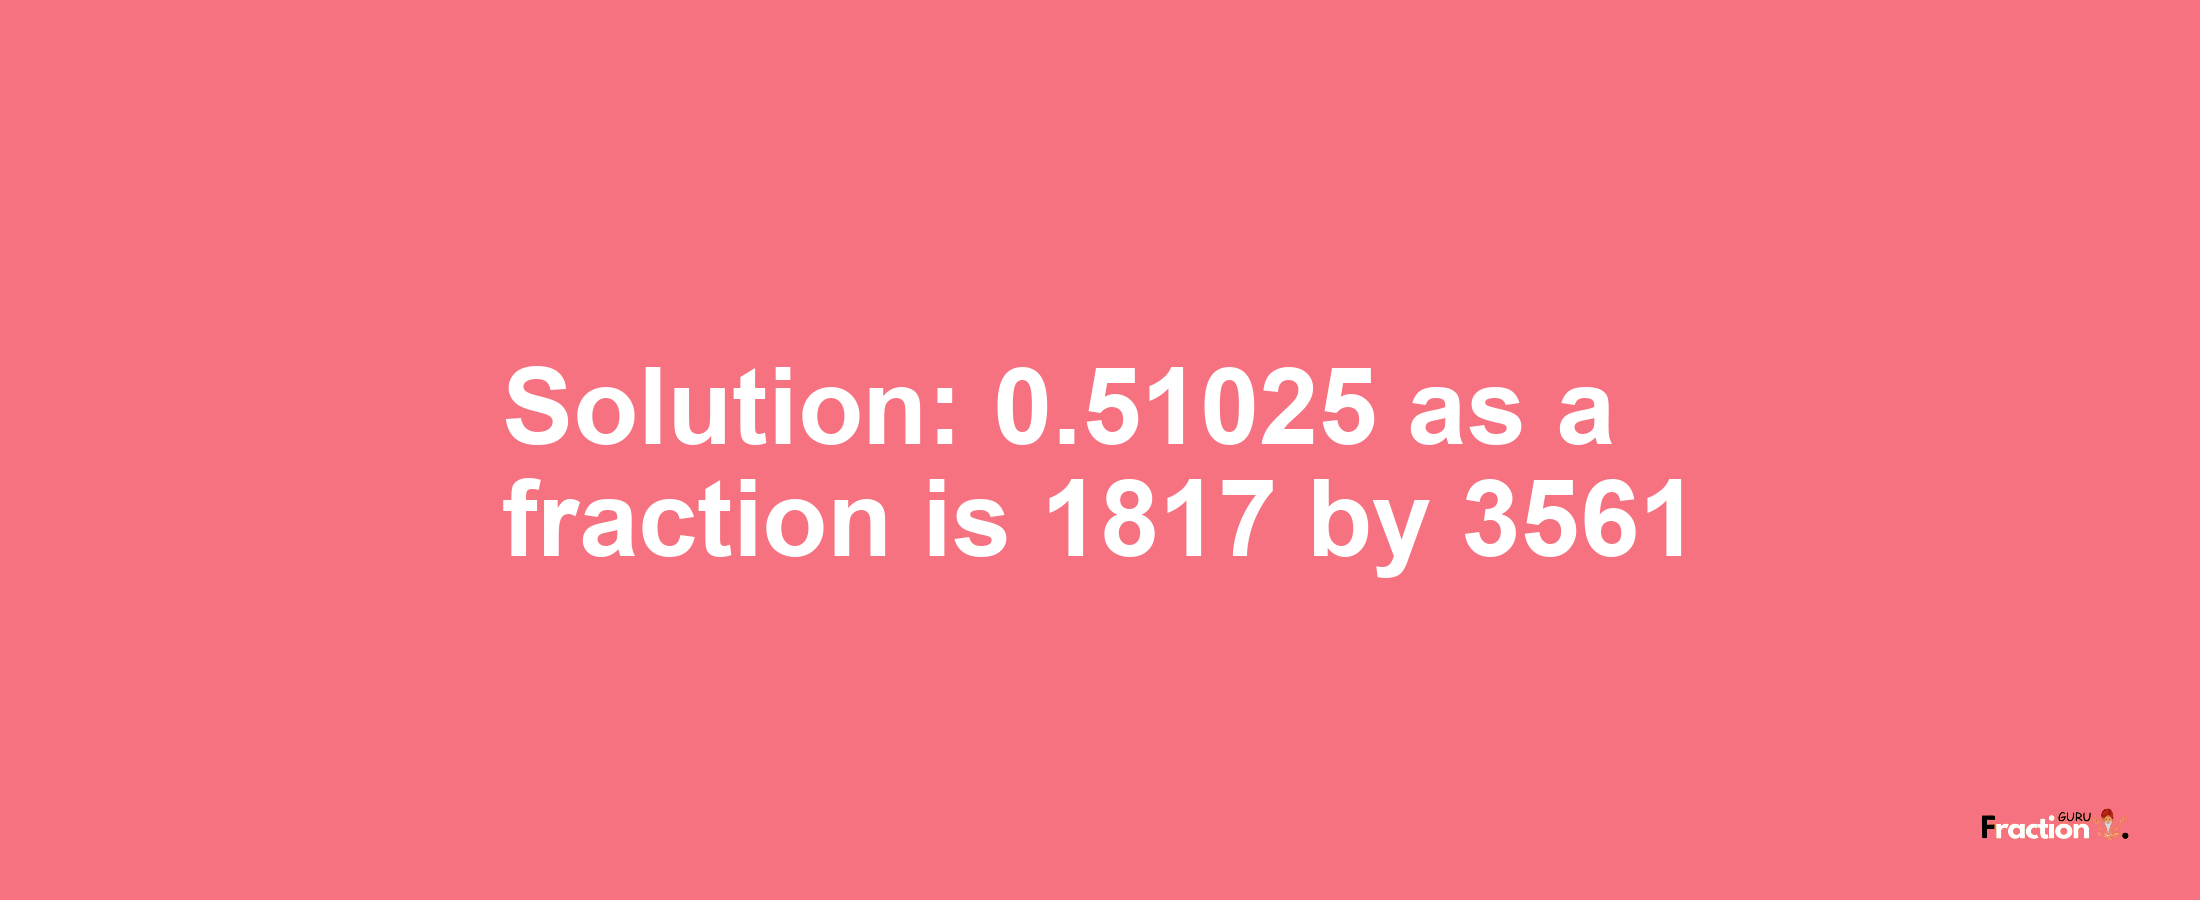 Solution:0.51025 as a fraction is 1817/3561